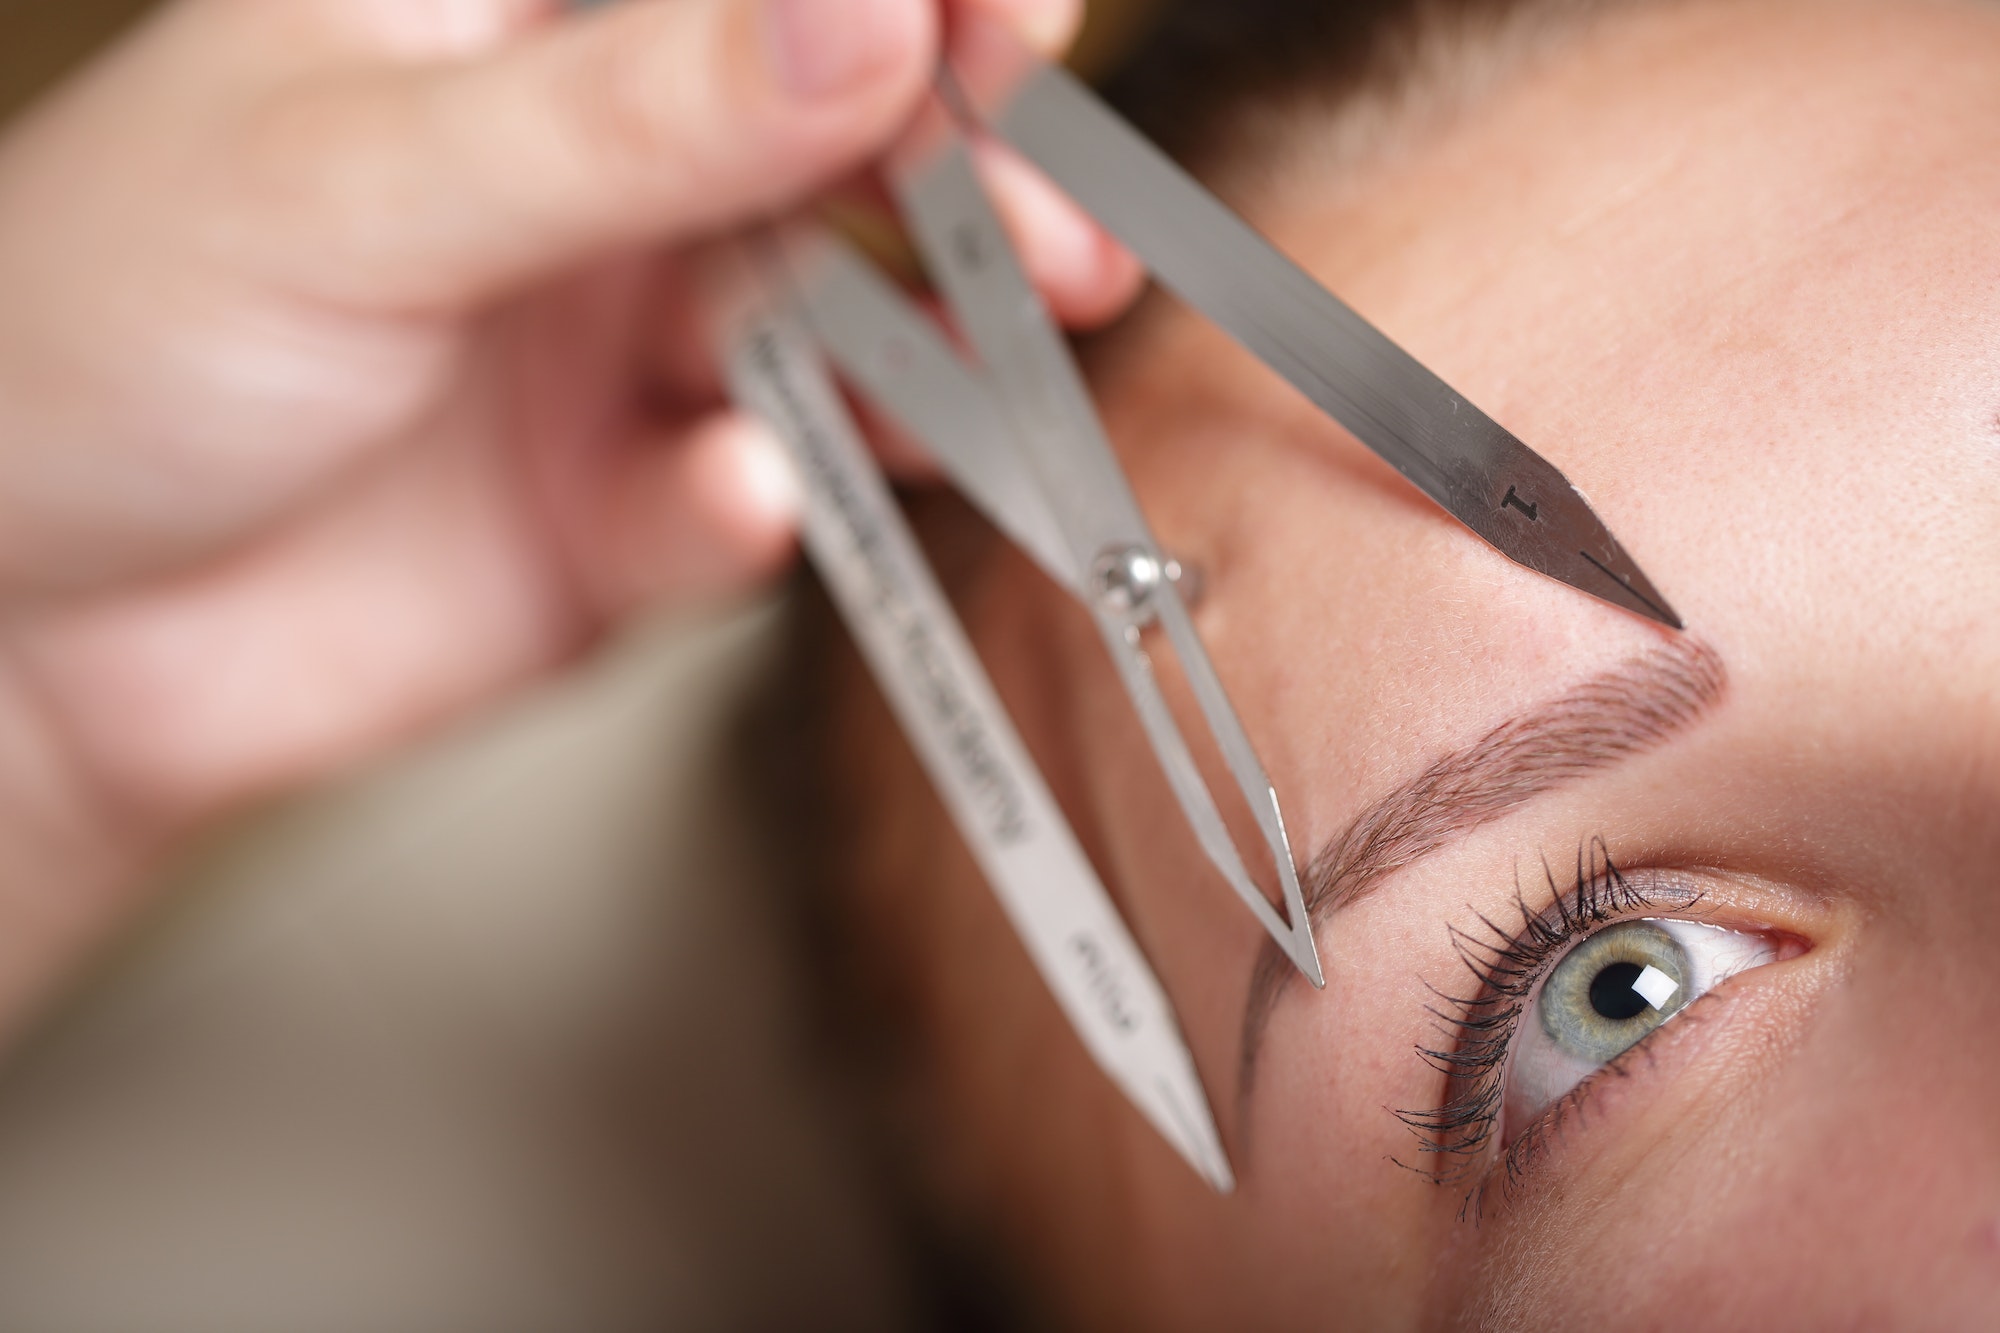 The eyebrows are measured for the treatment